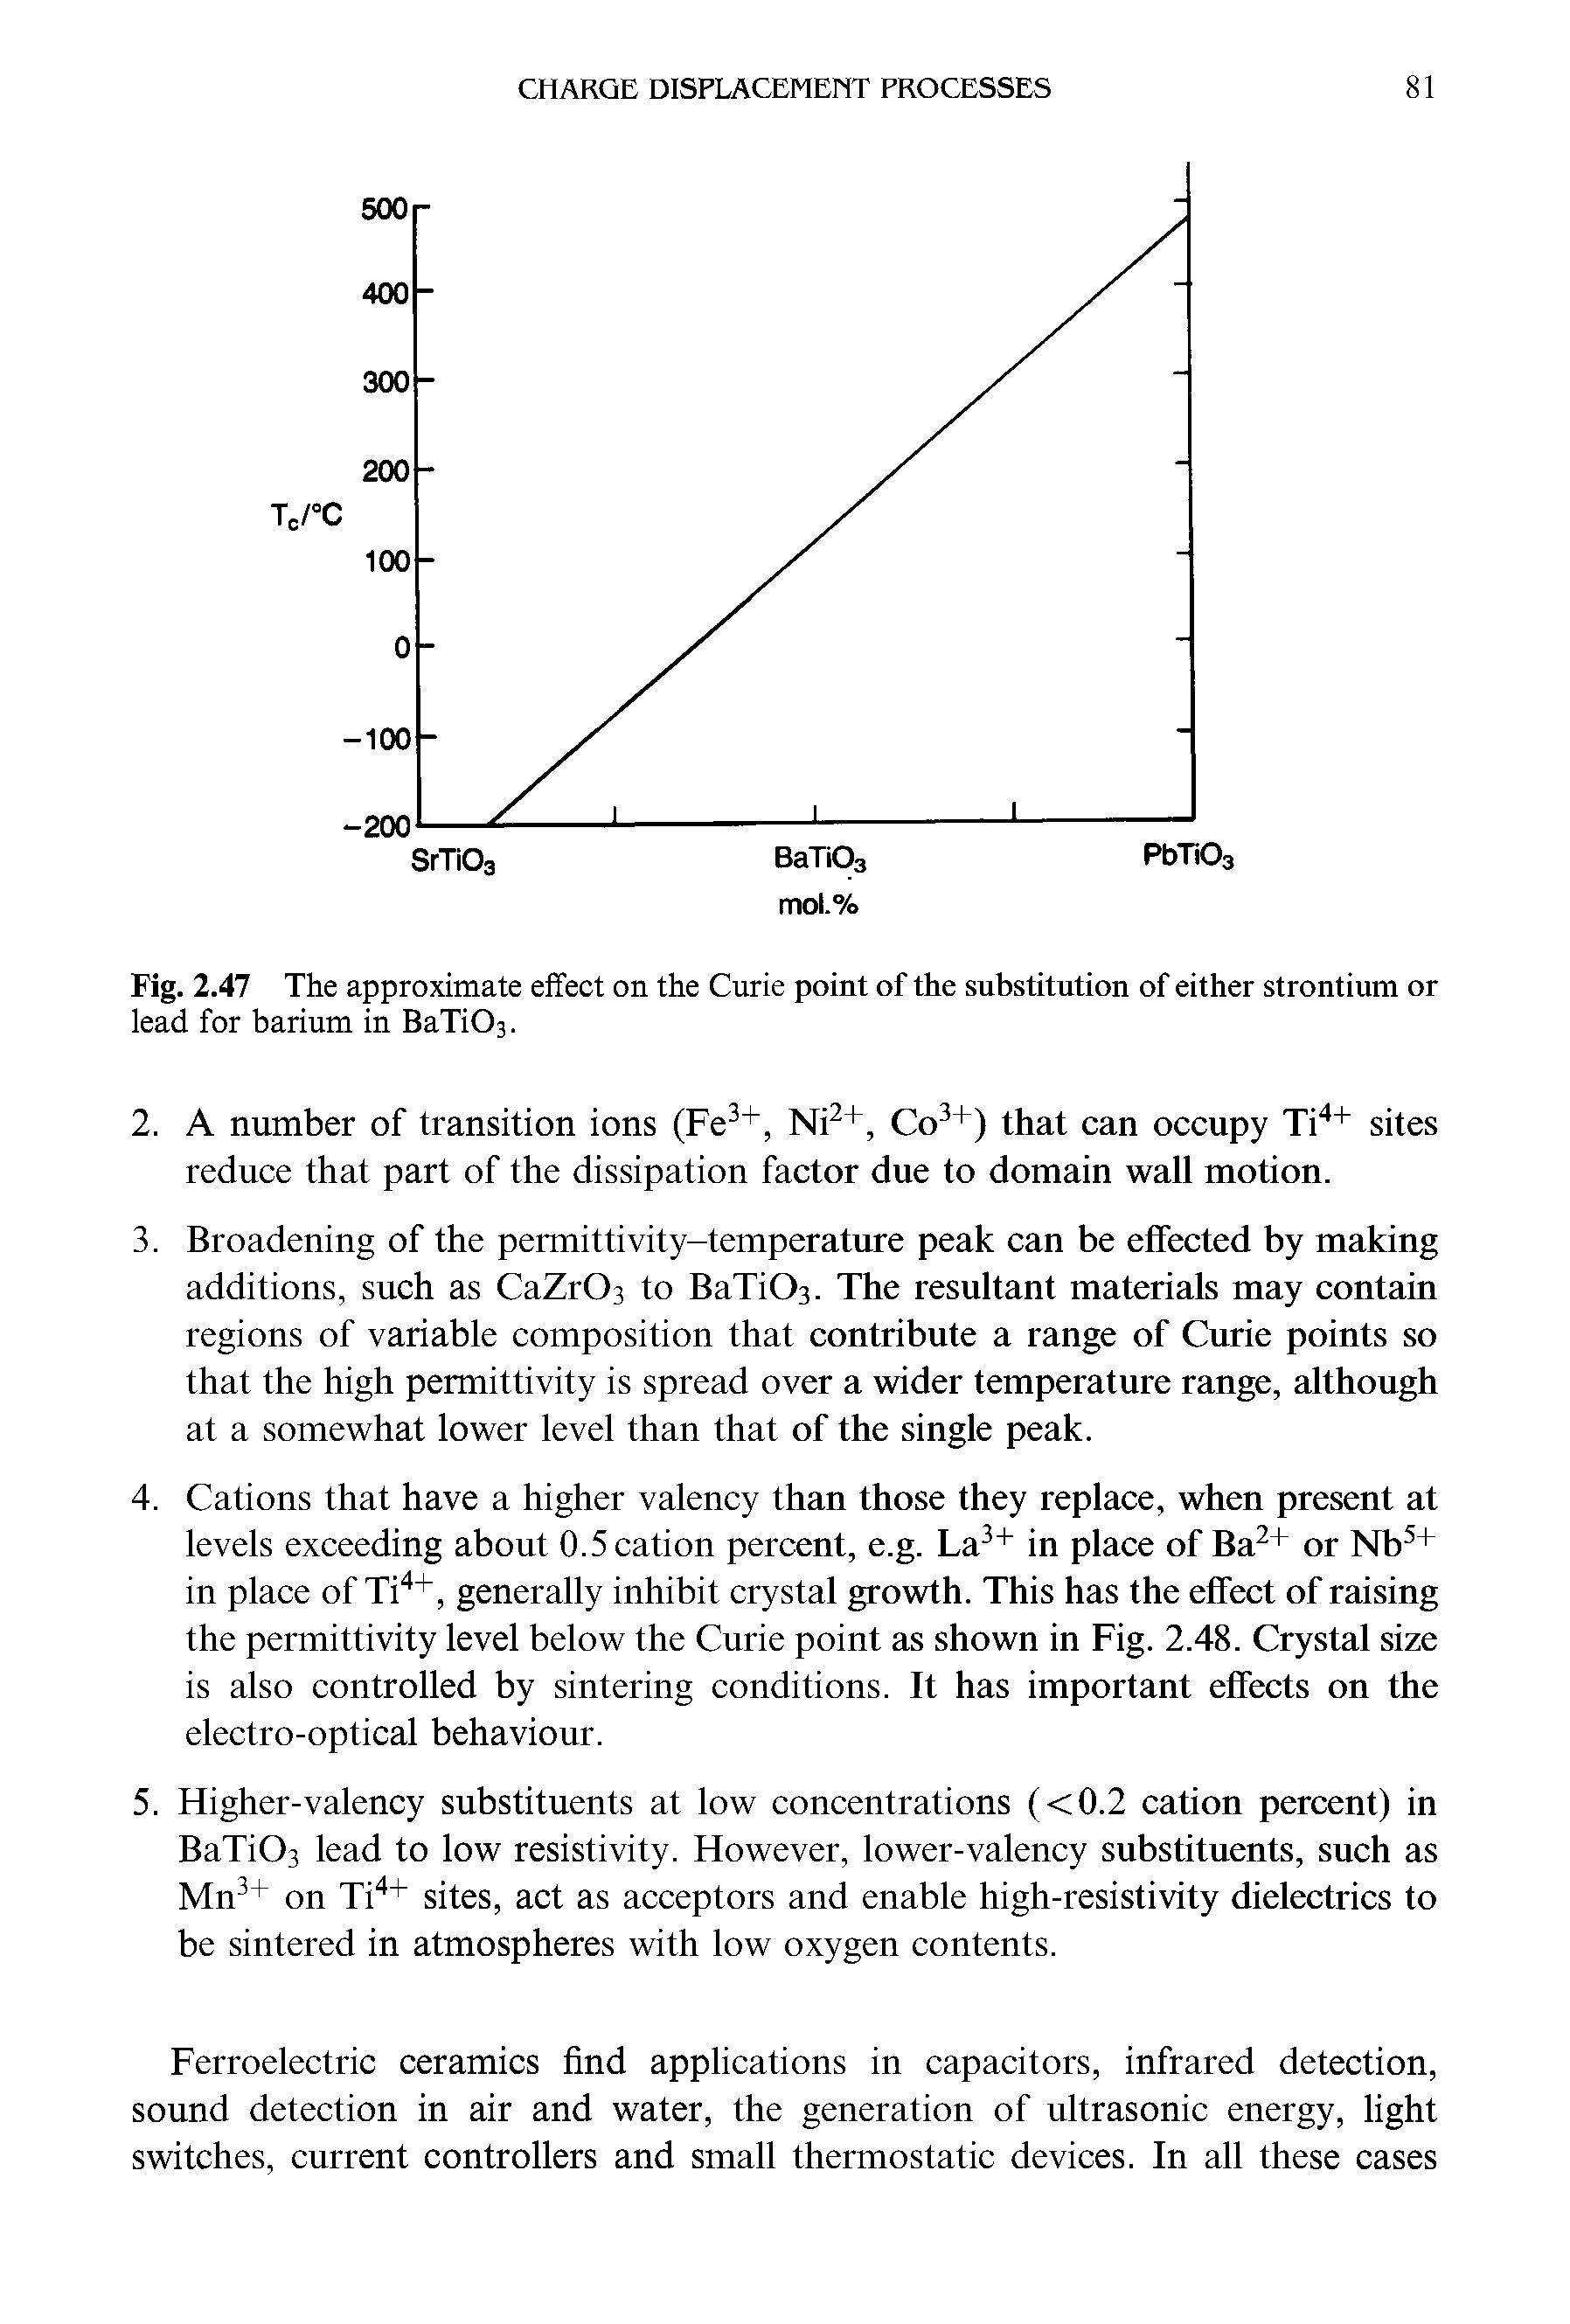 Fig. 2.47 The approximate effect on the Curie point of the substitution of either strontium or...